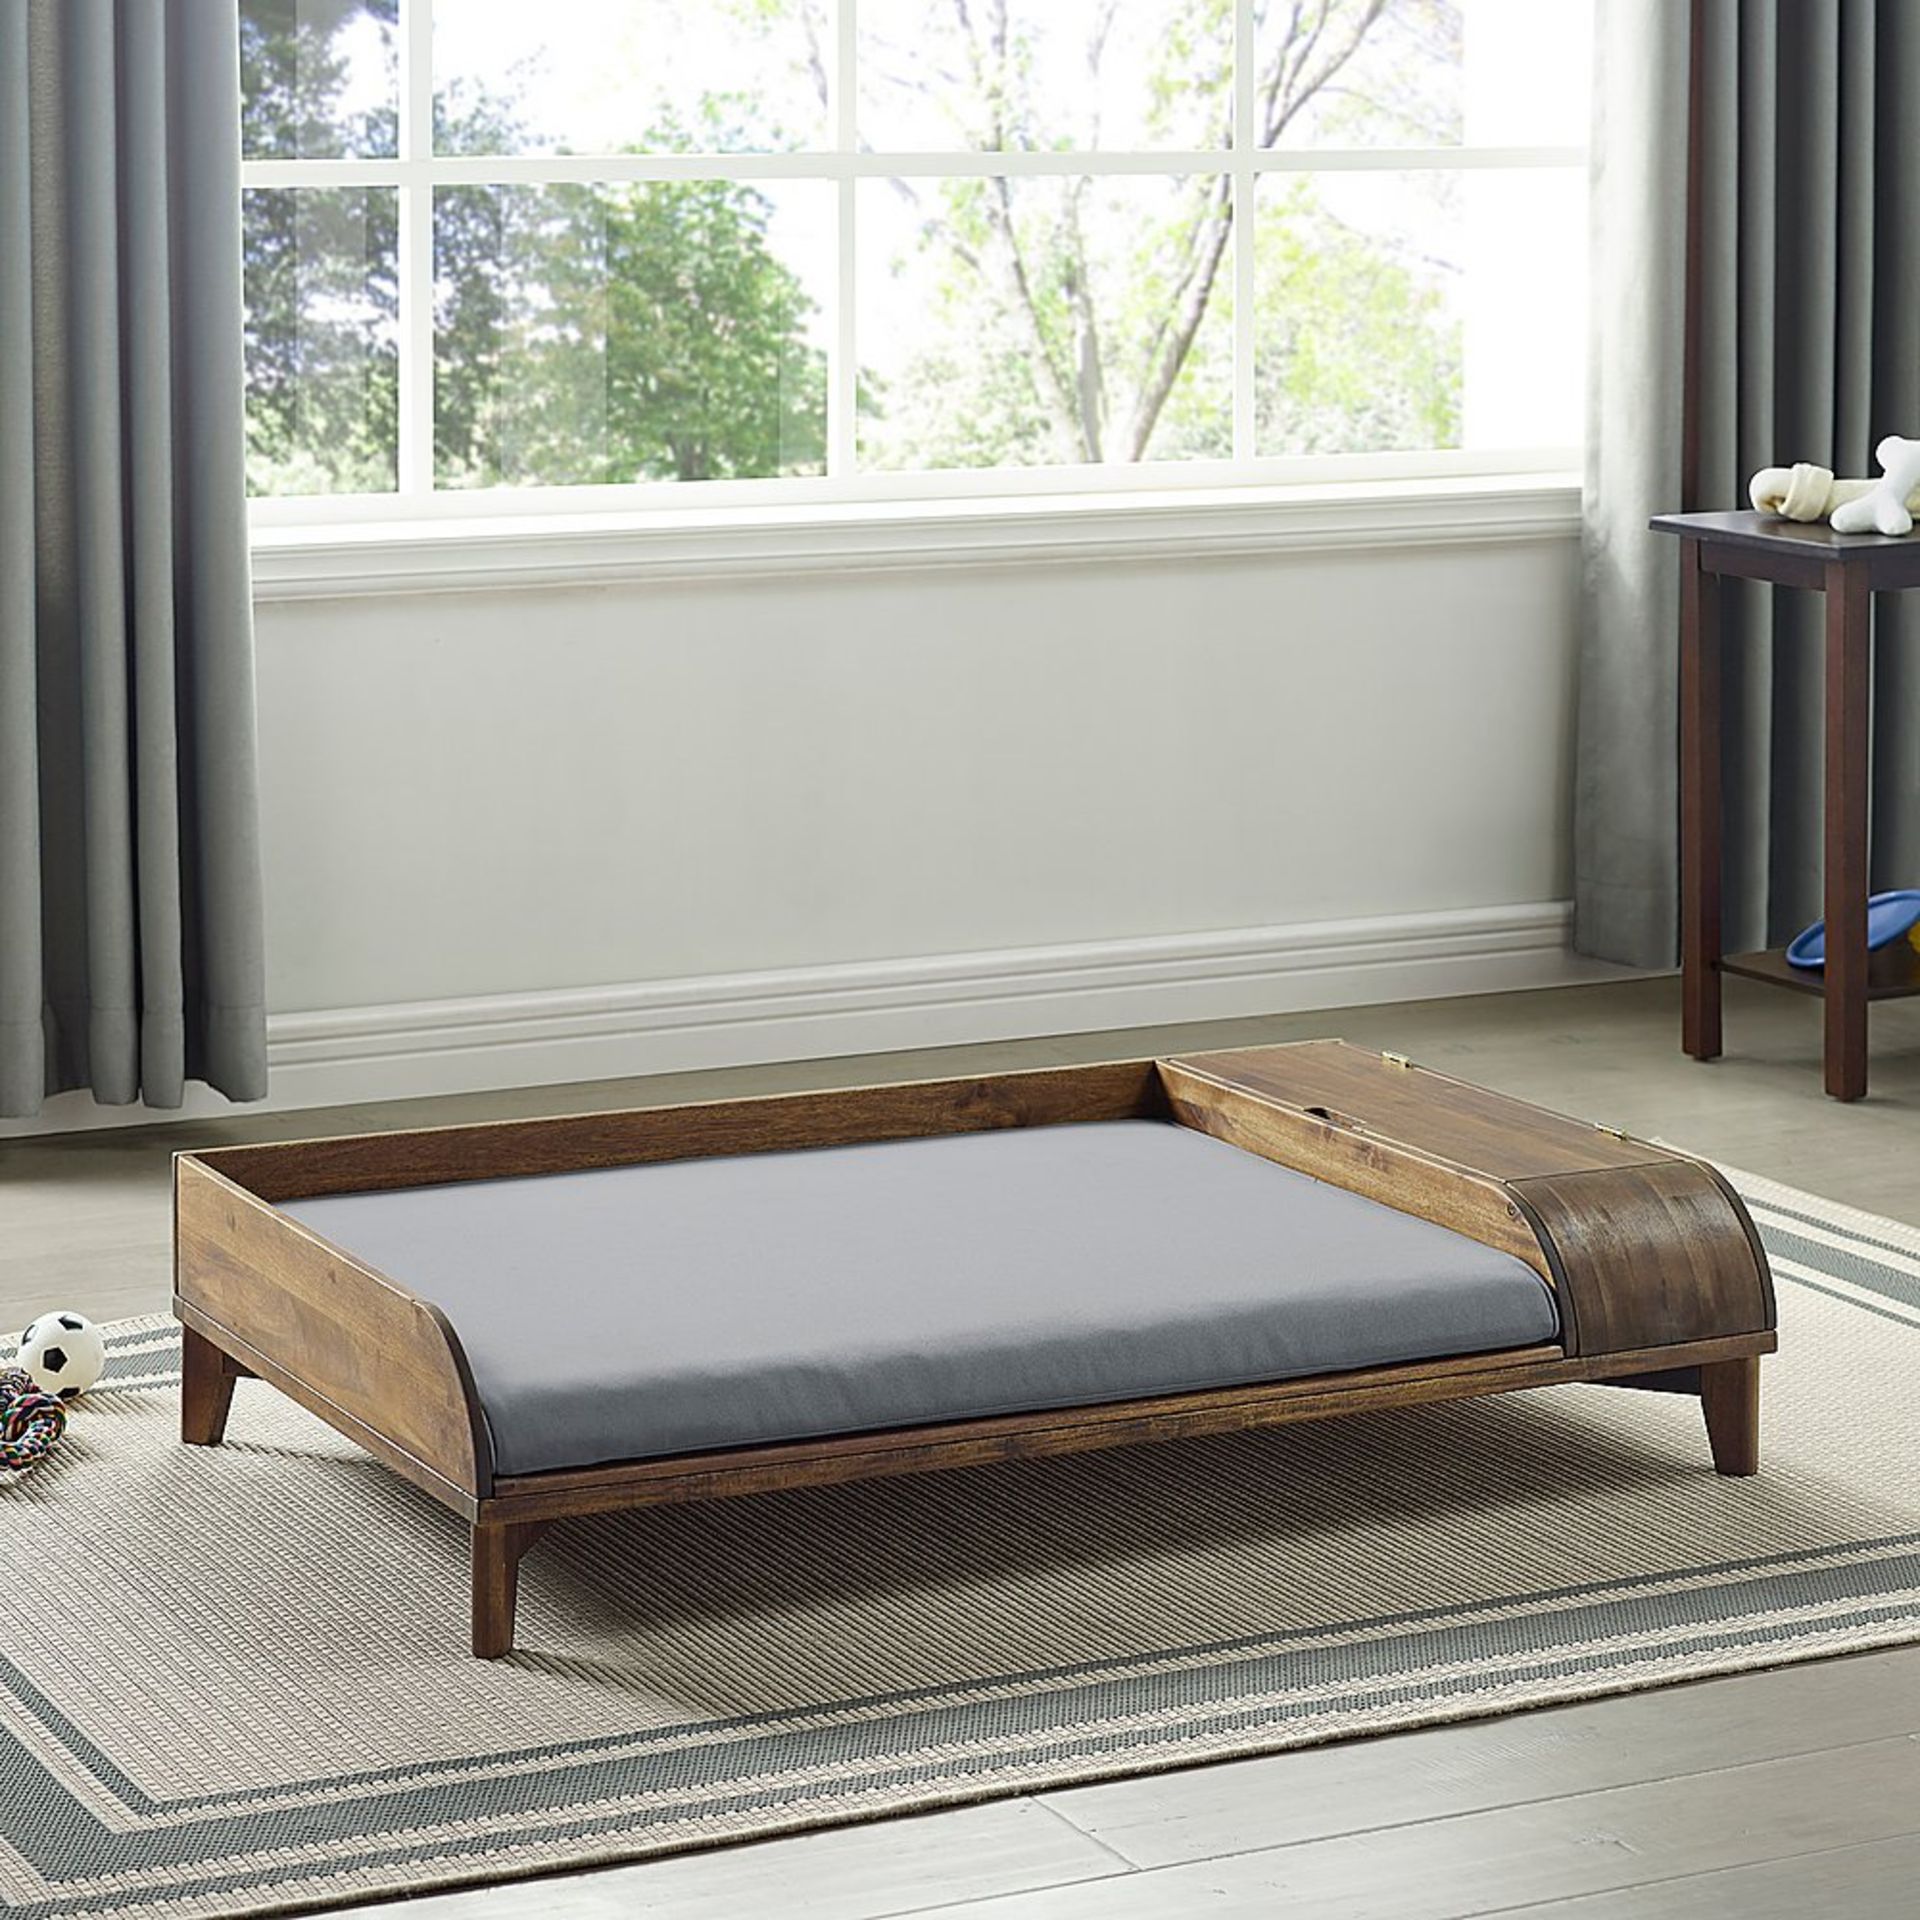 A1 PRODUCT NEW - SOLID WOOD STORAGE PED BED WITH CUSHION IN DARK BROWN/GREY - RRP Ã‚Â£245